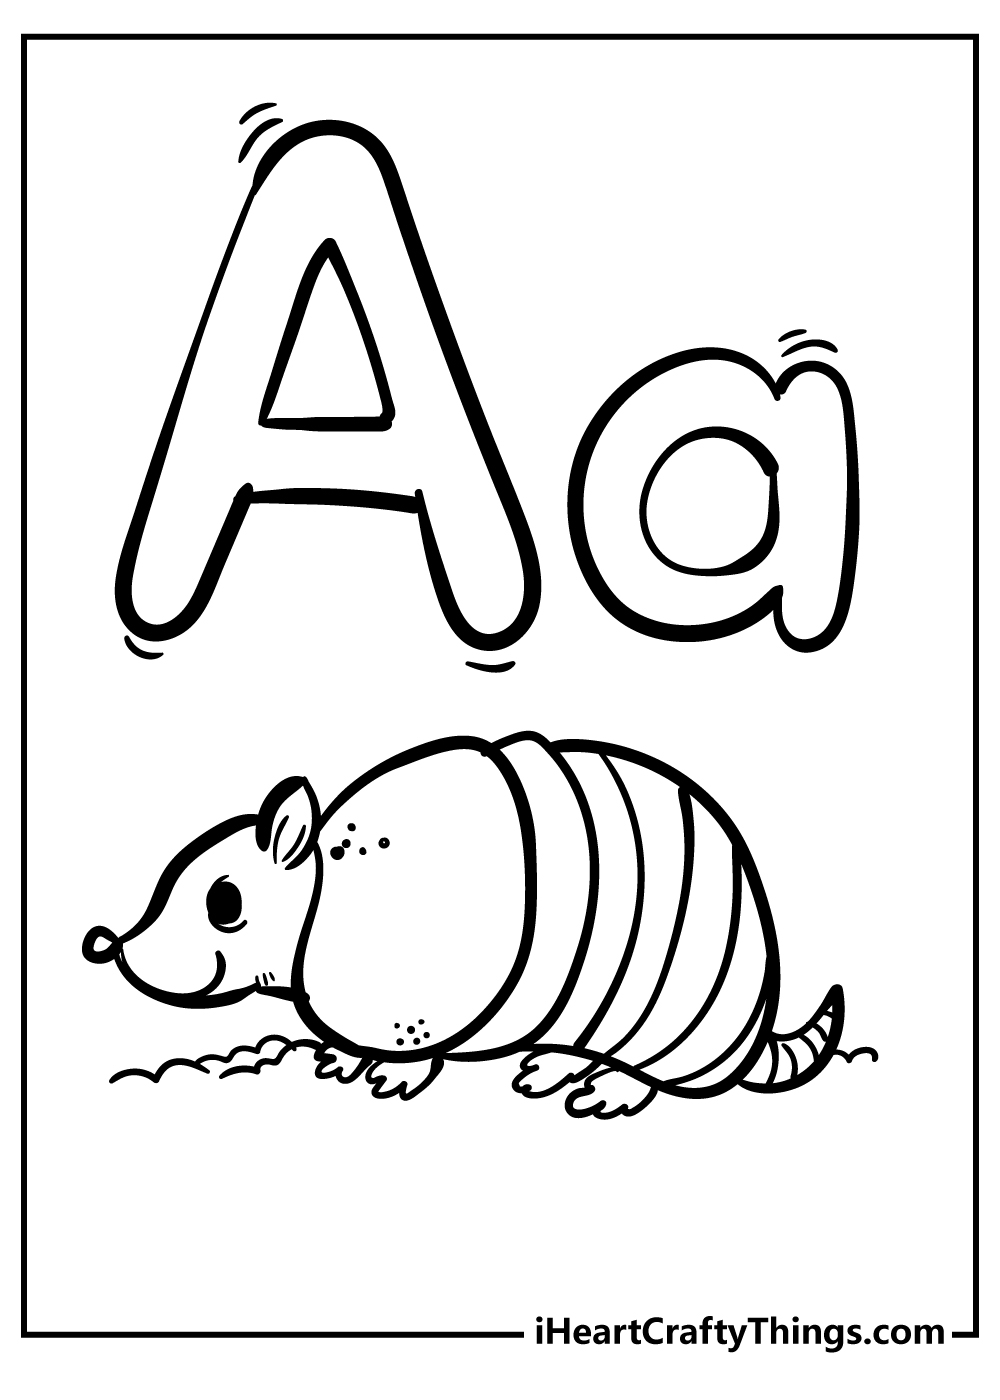 Letter A coloring pages free printable